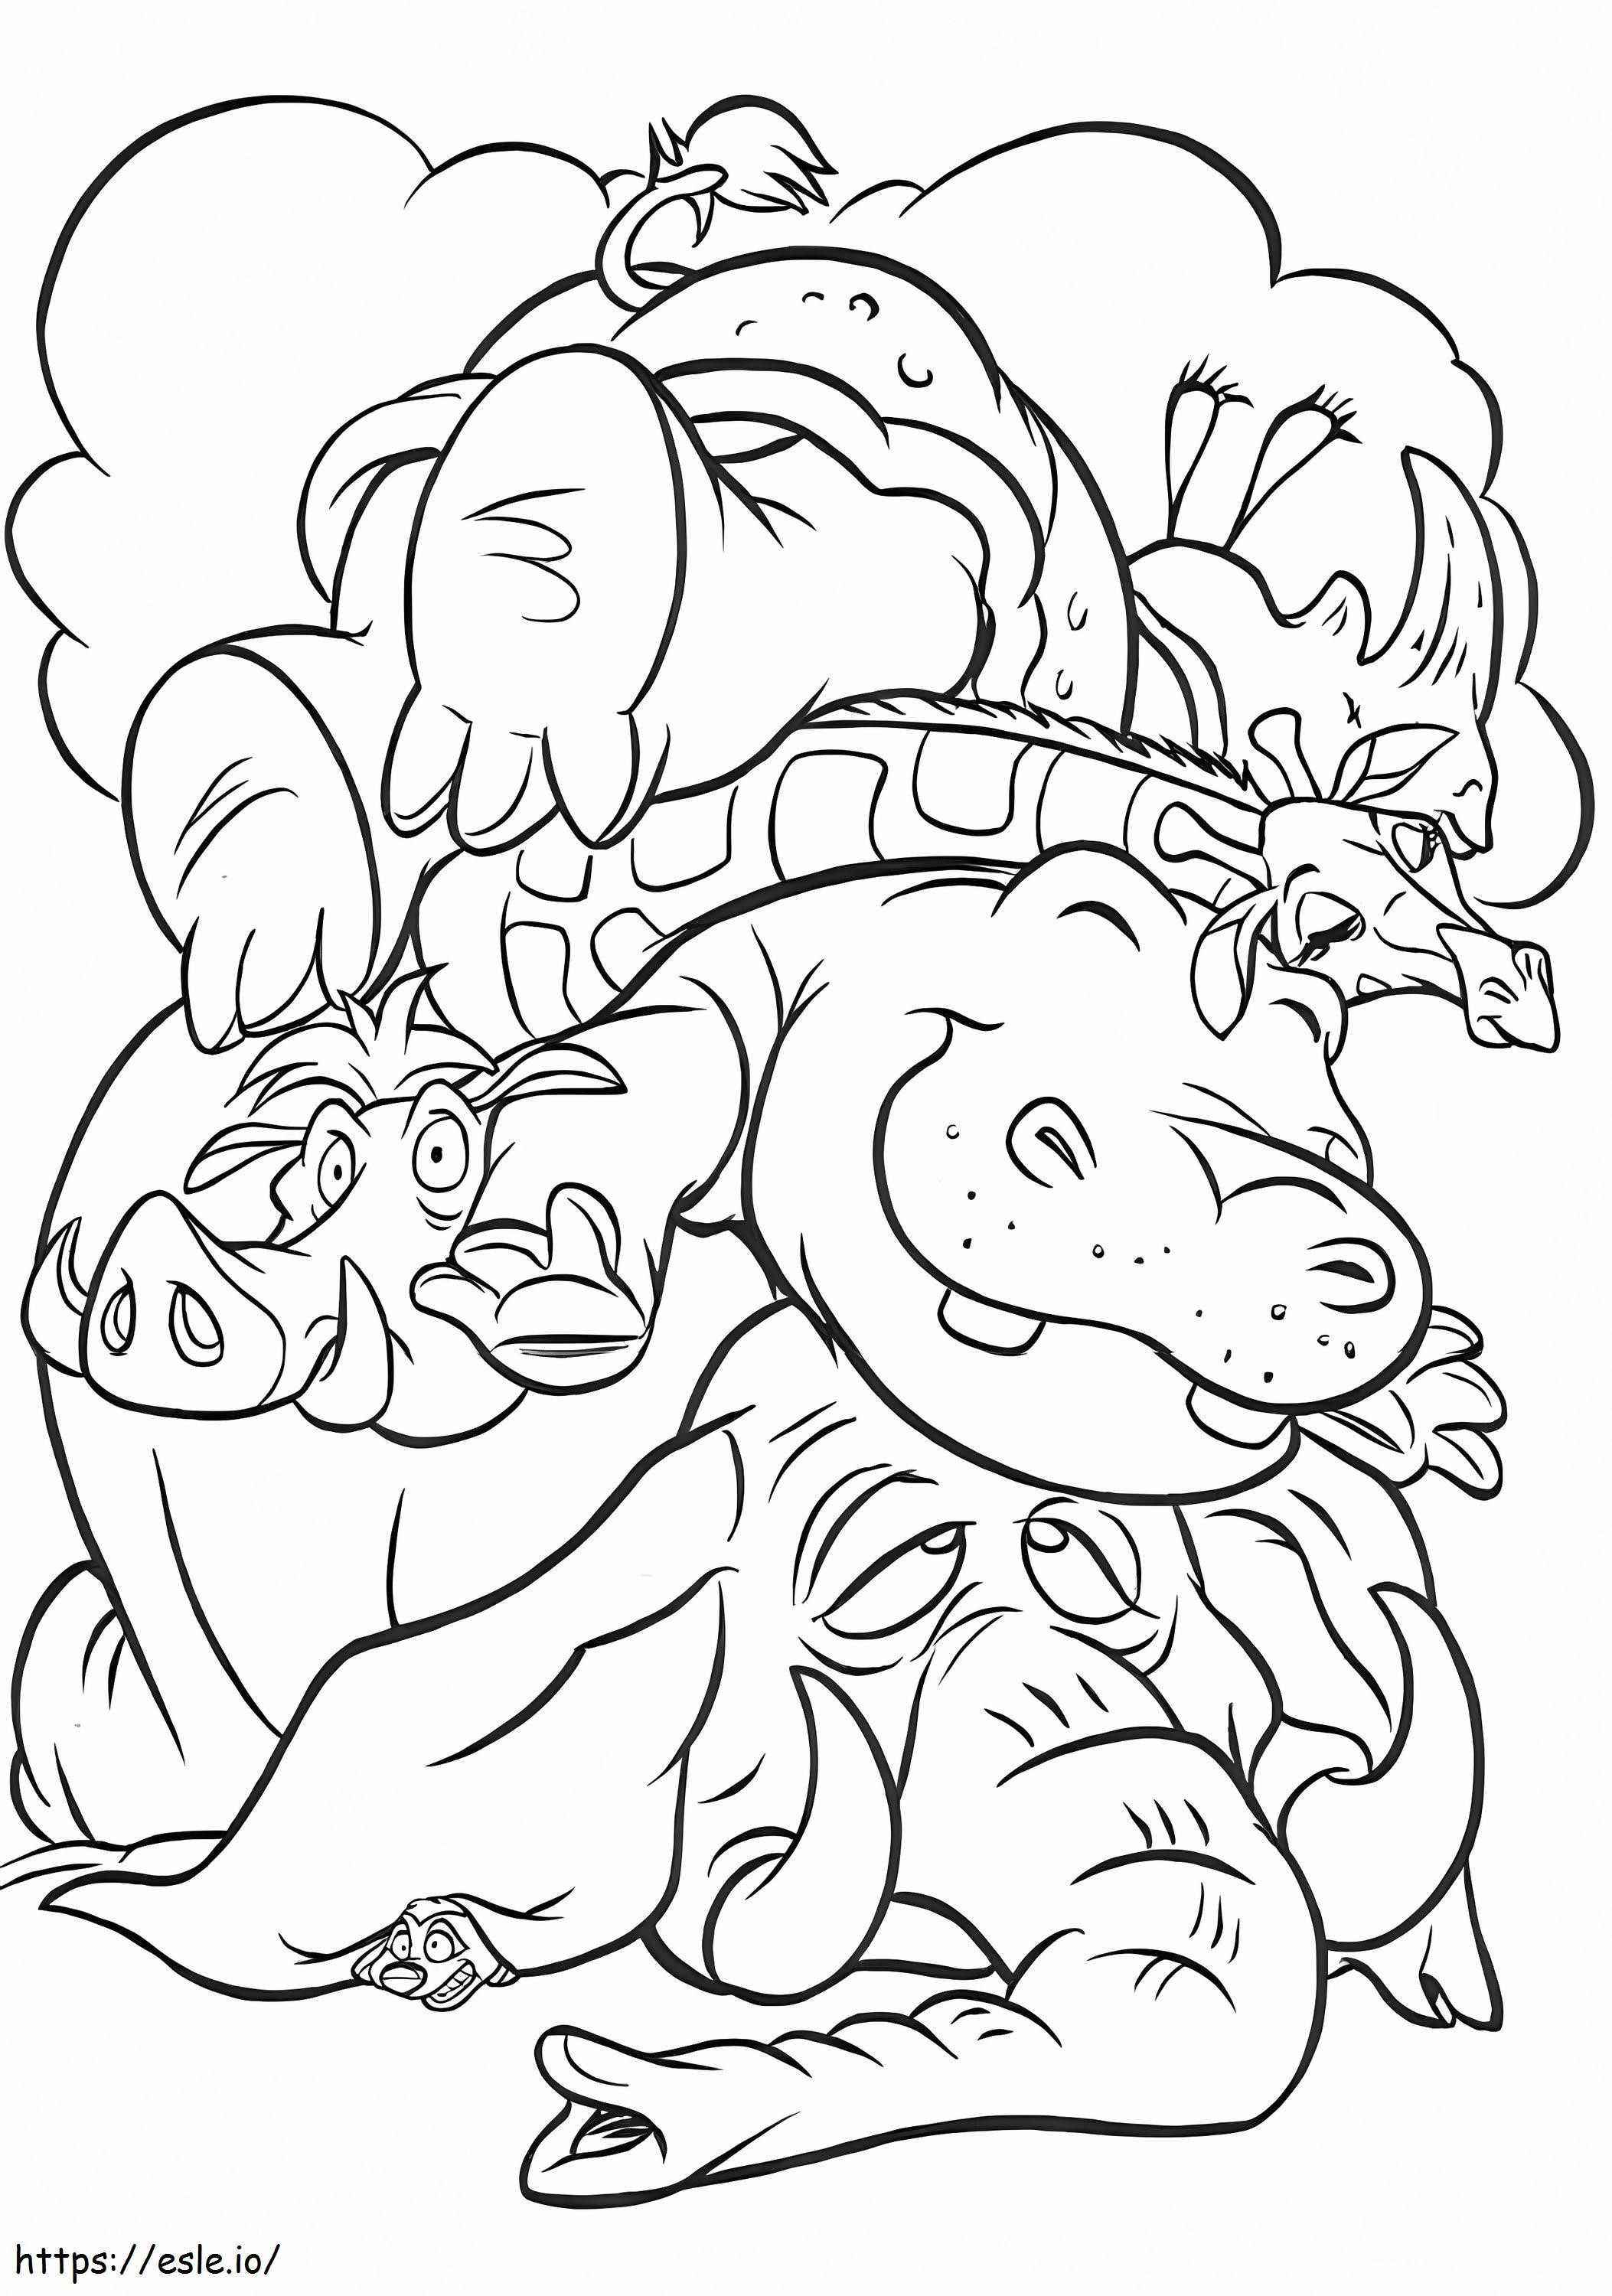 1560502525 Sad For Elephant A4 coloring page